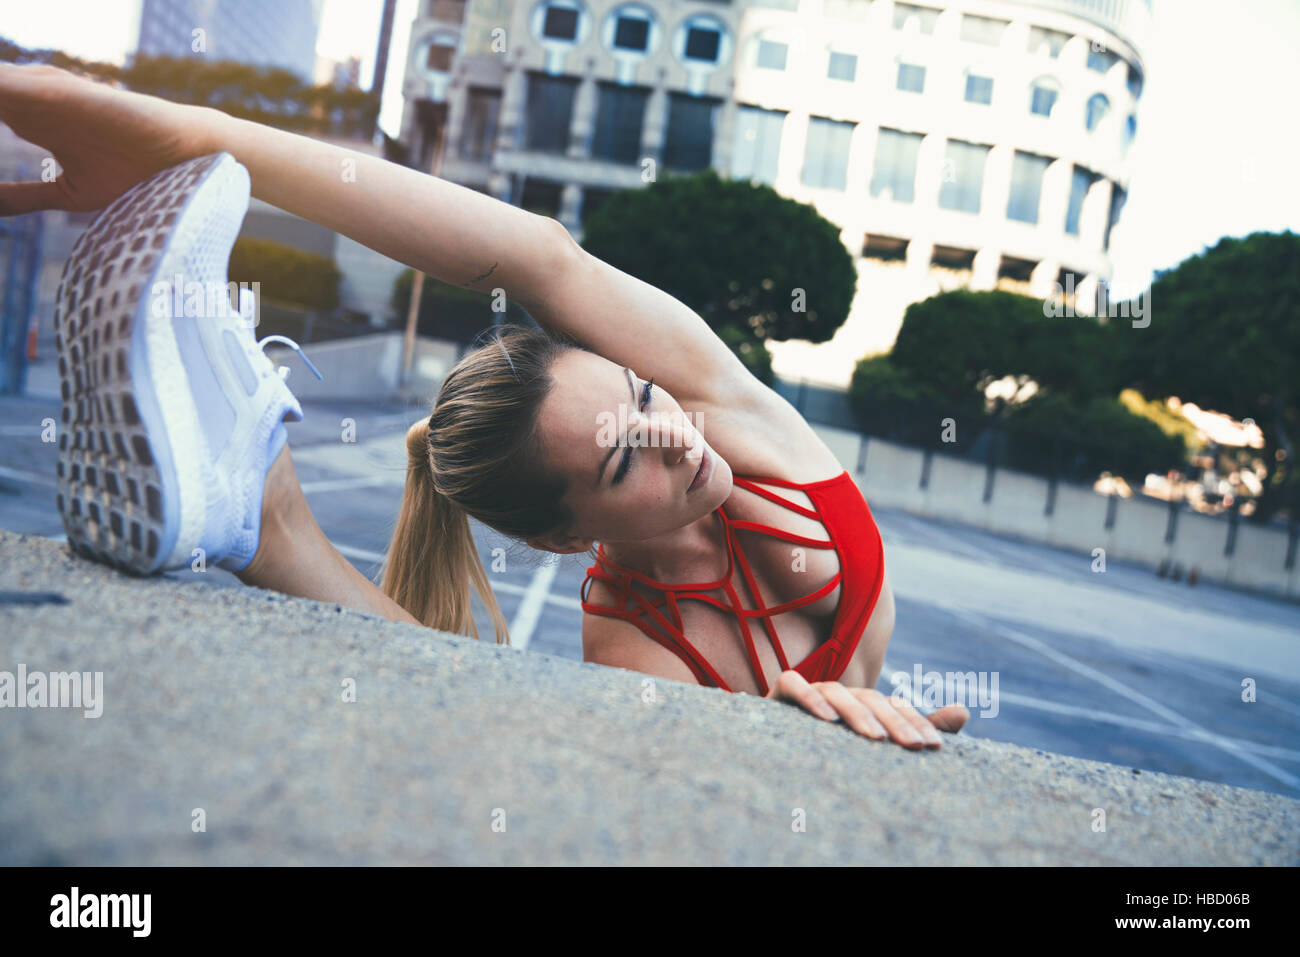 Young woman stretching contre wall outdoors Banque D'Images